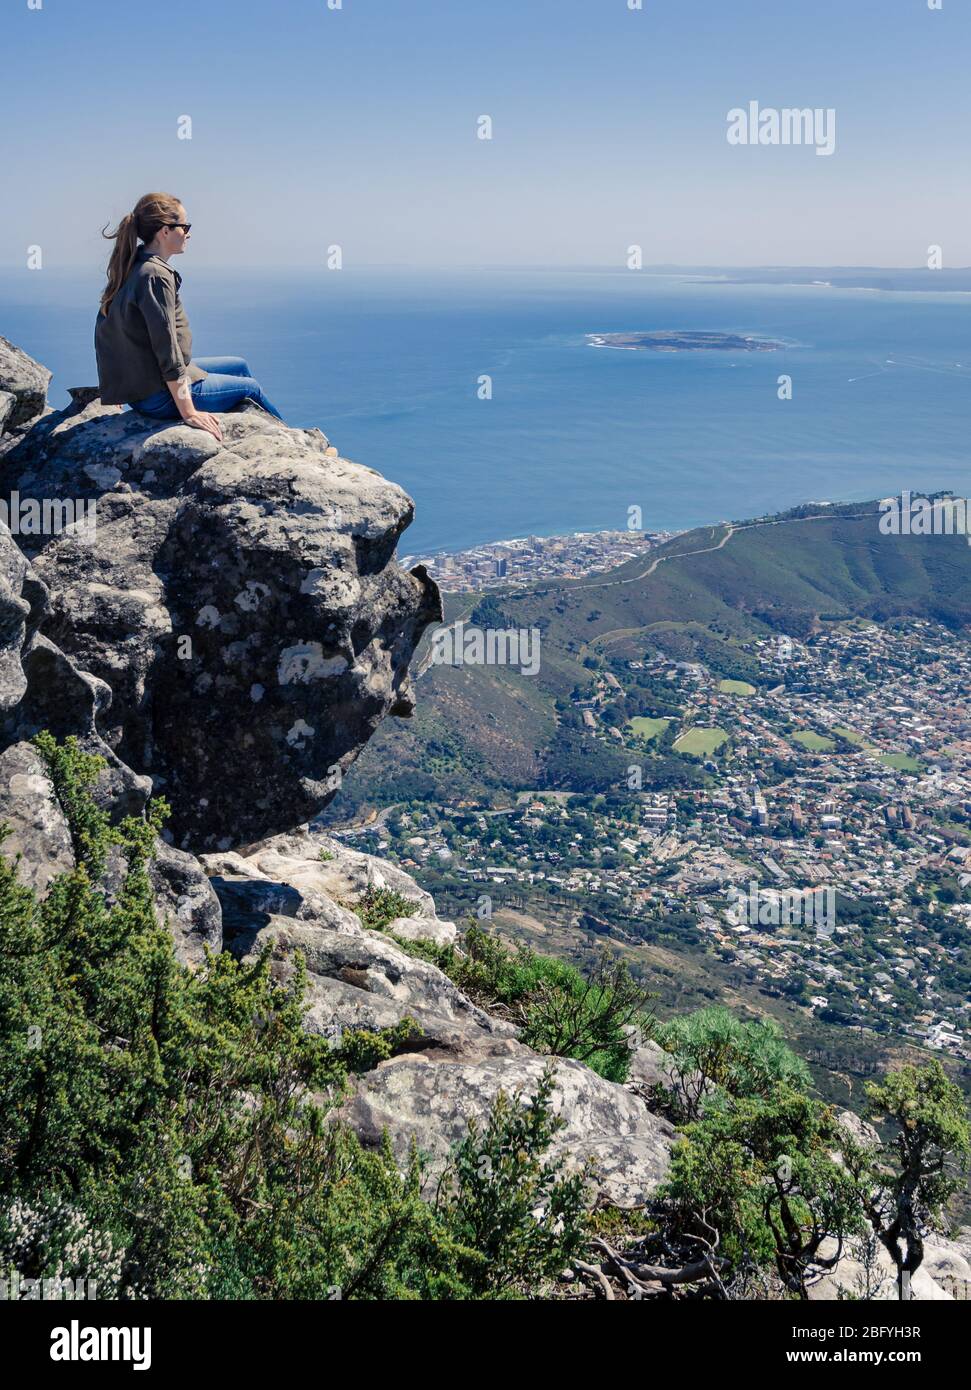 Woman sitting on cliff edge  overlooking ocean and Roben island from table mountain cape town south africa Stock Photo